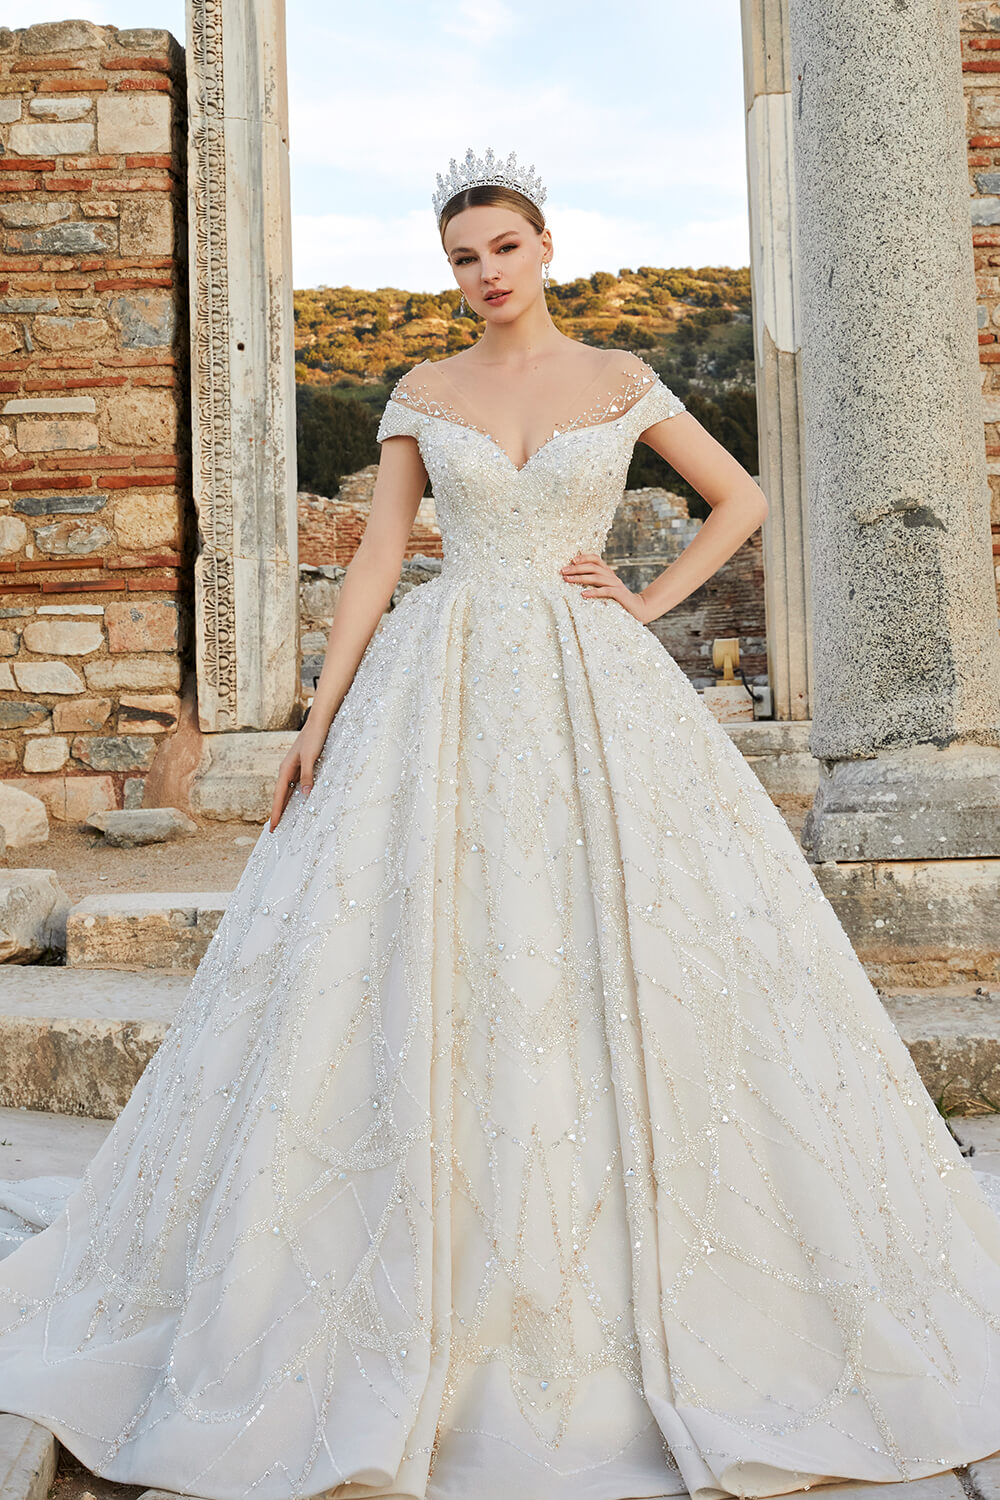 off-the-shoulder illusion bodice gown